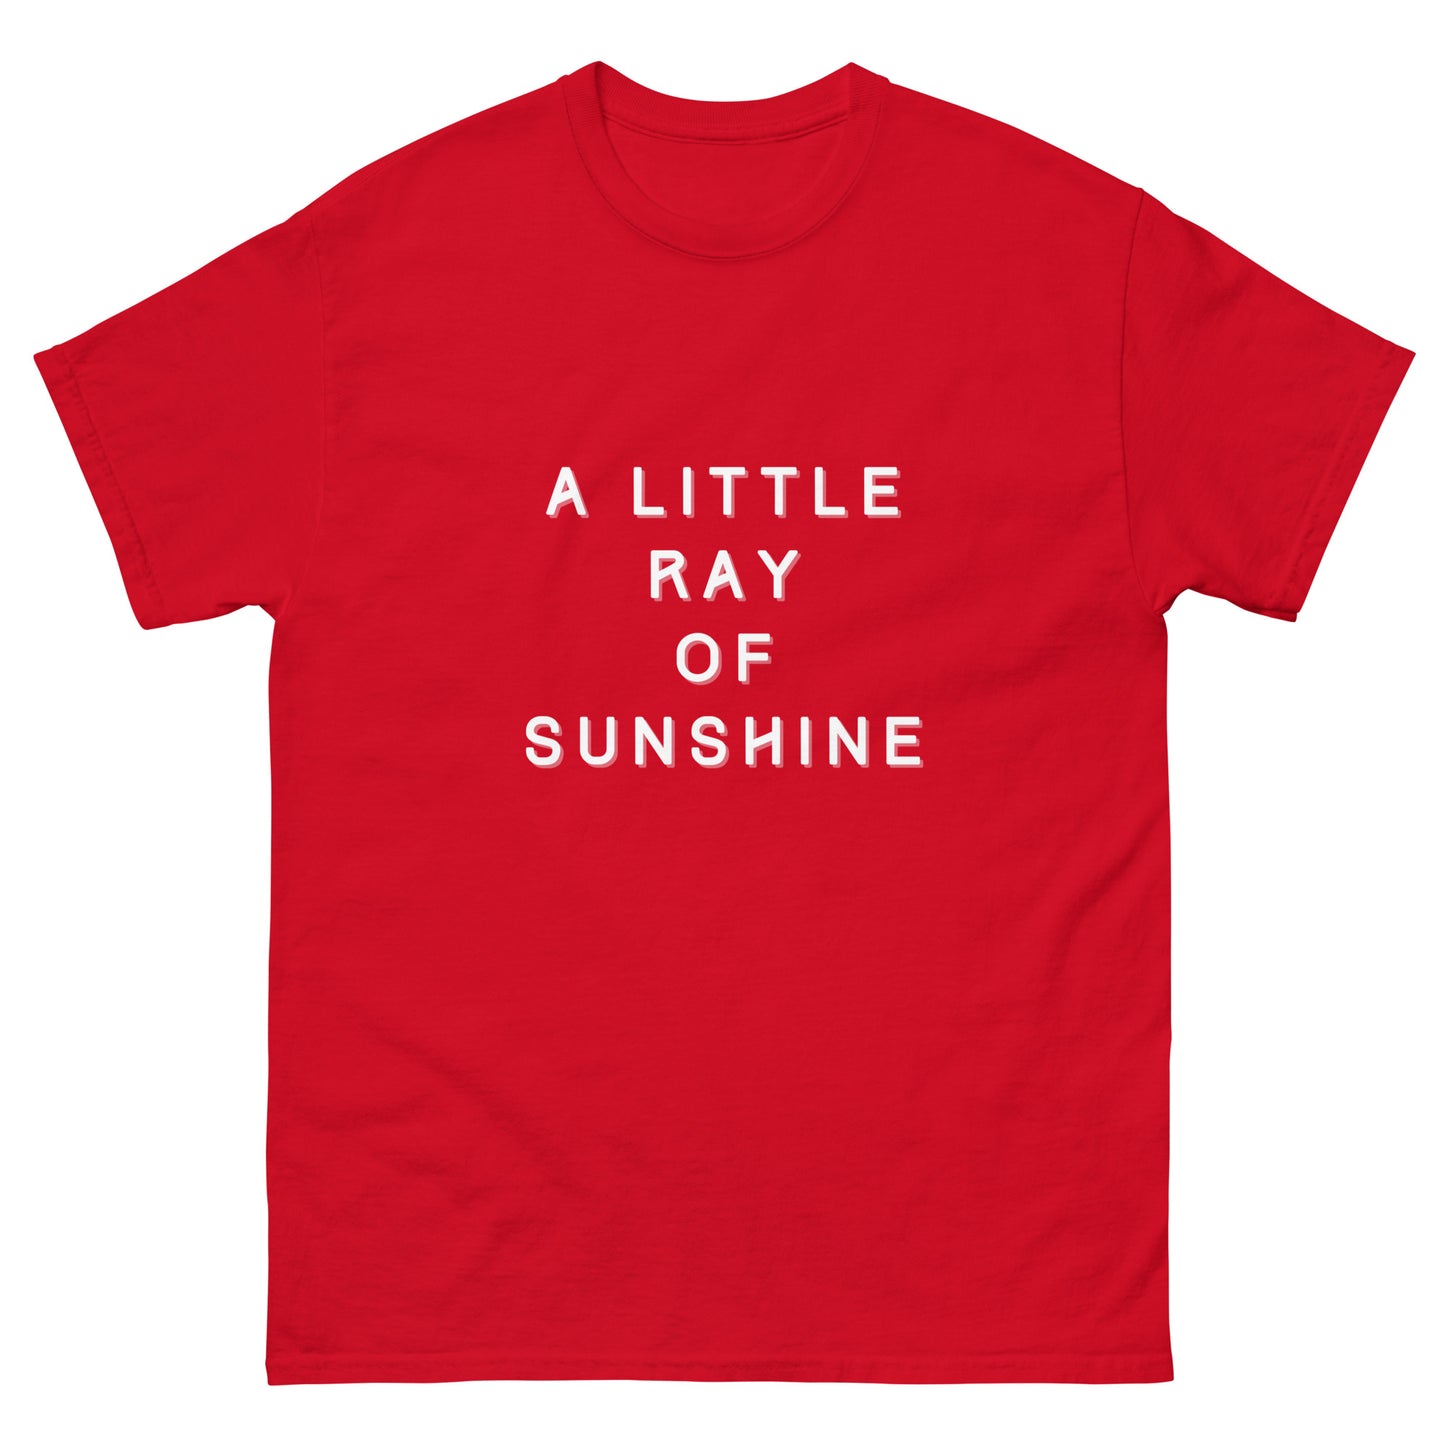 A Little Ray of Sunshine- Men's classic tee